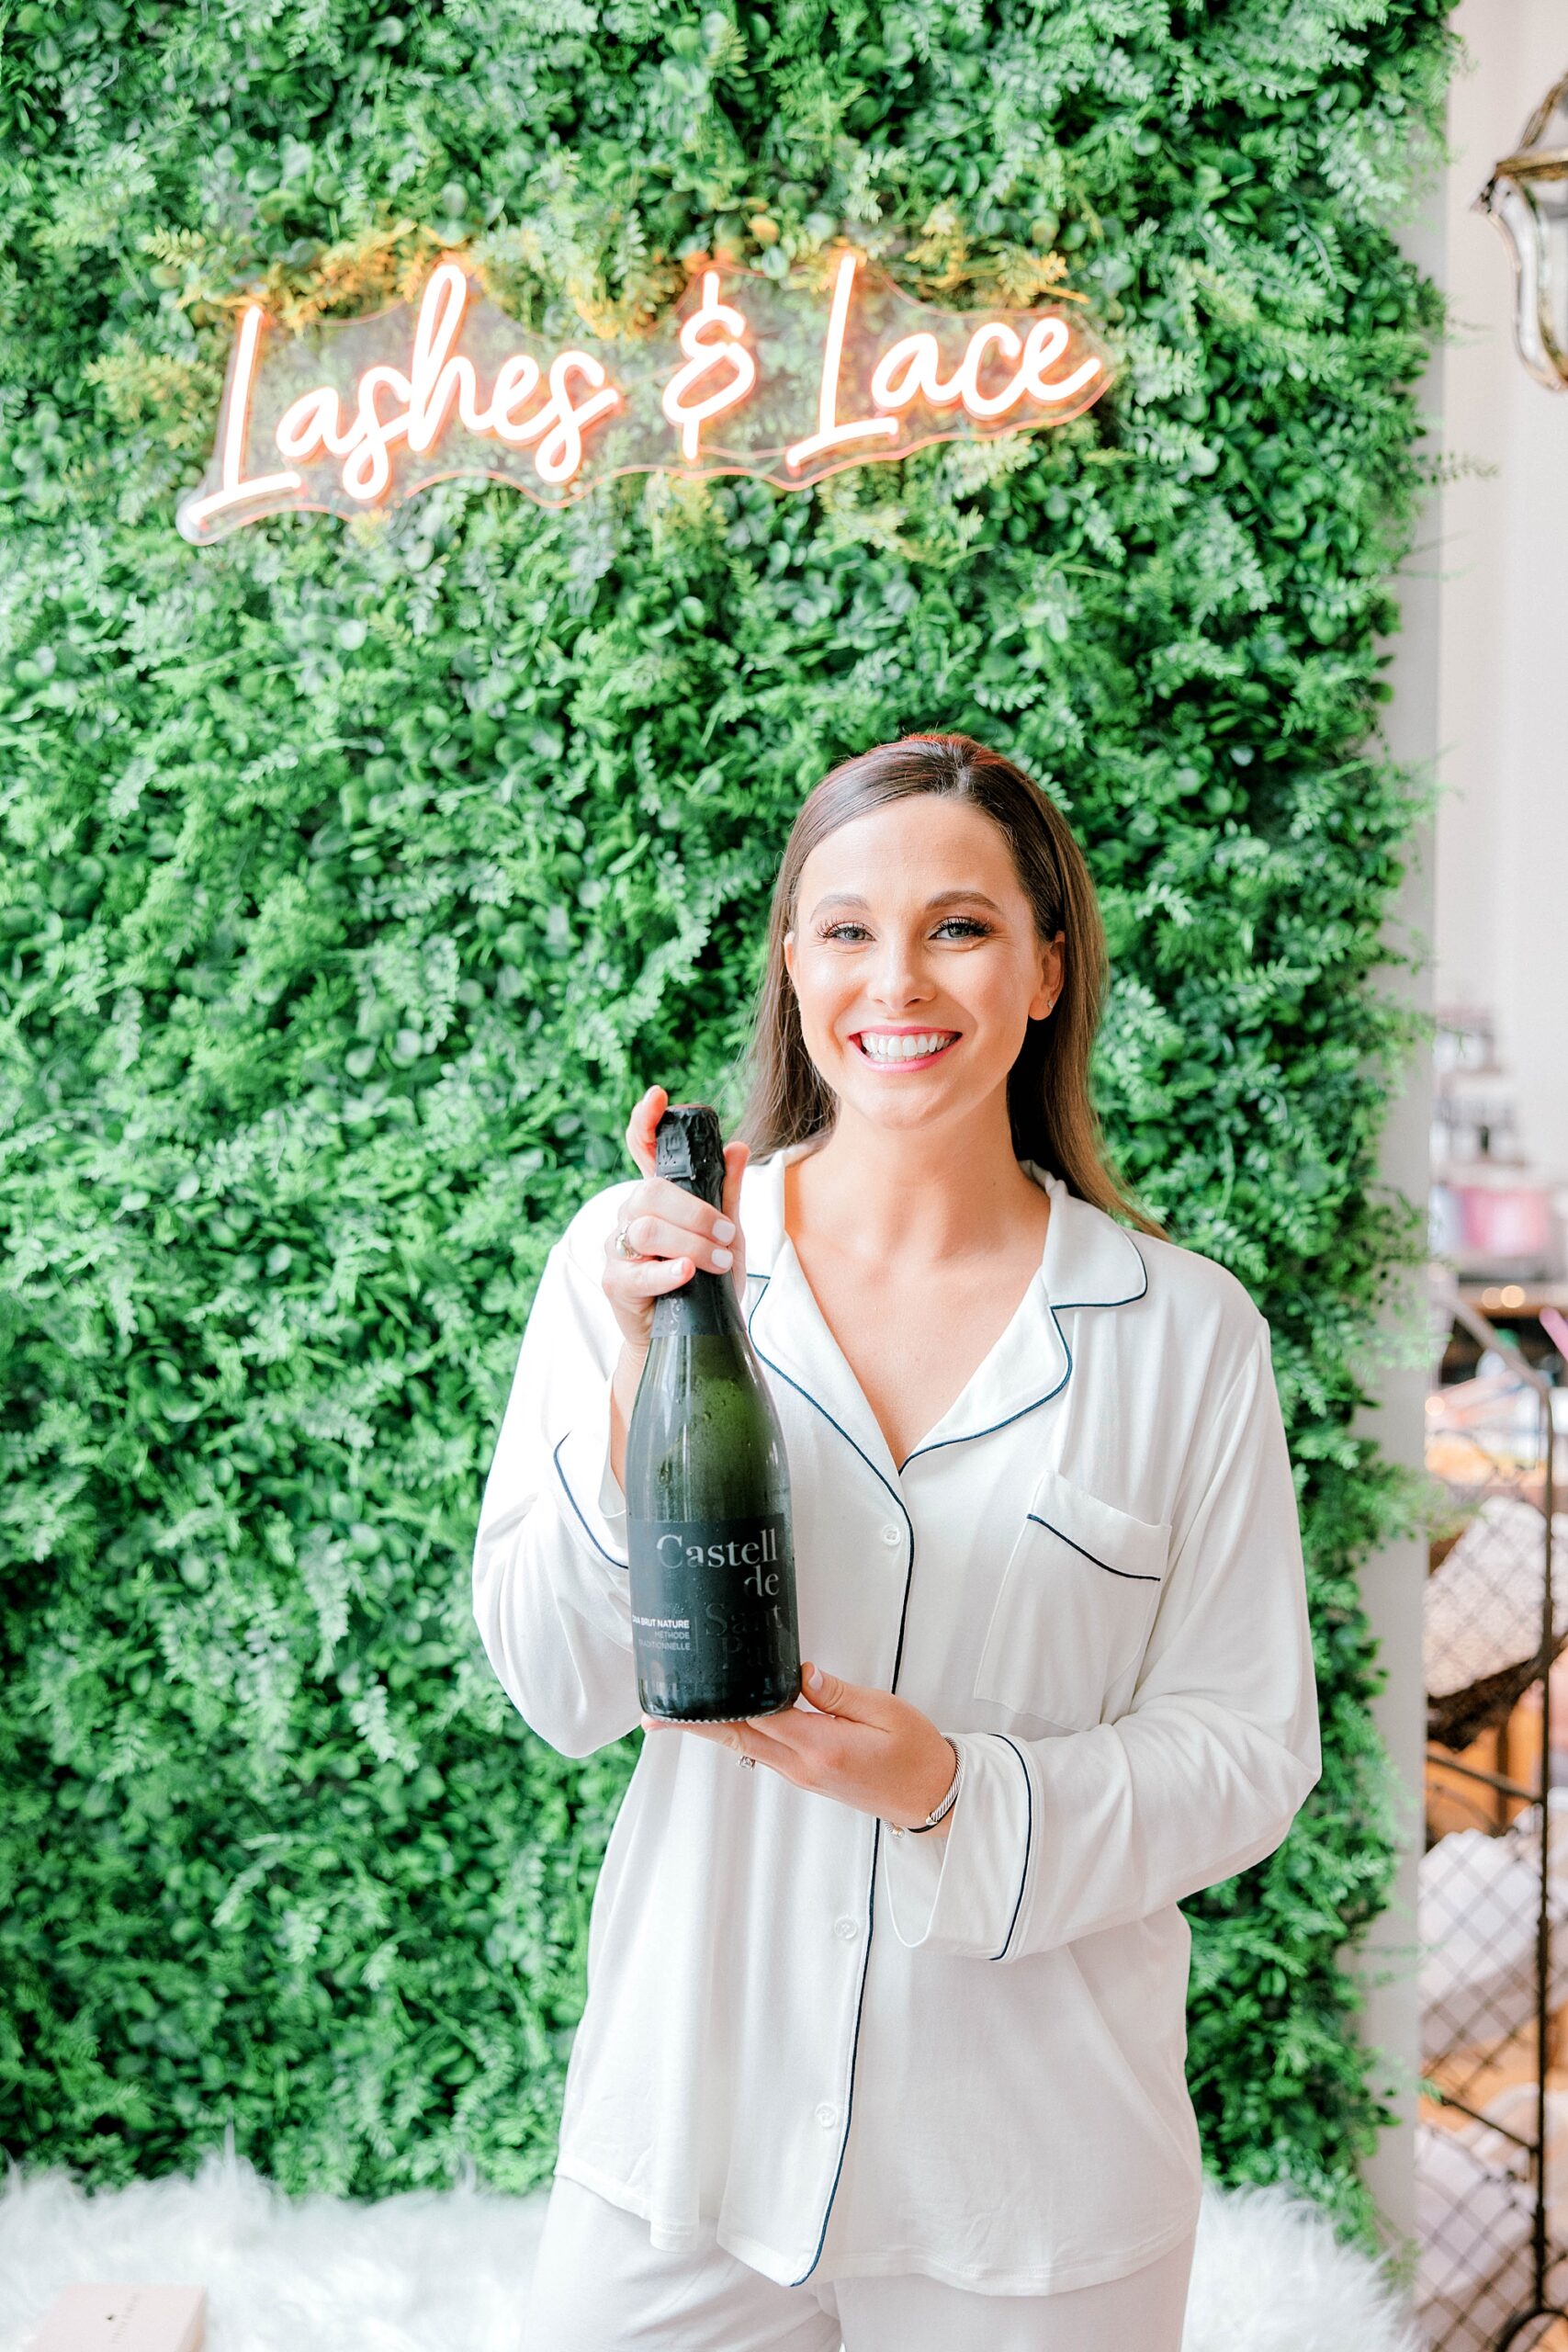 bride holds bottle of champagne in white pajamas by greenery wall with neon sign at Lashes & Lace